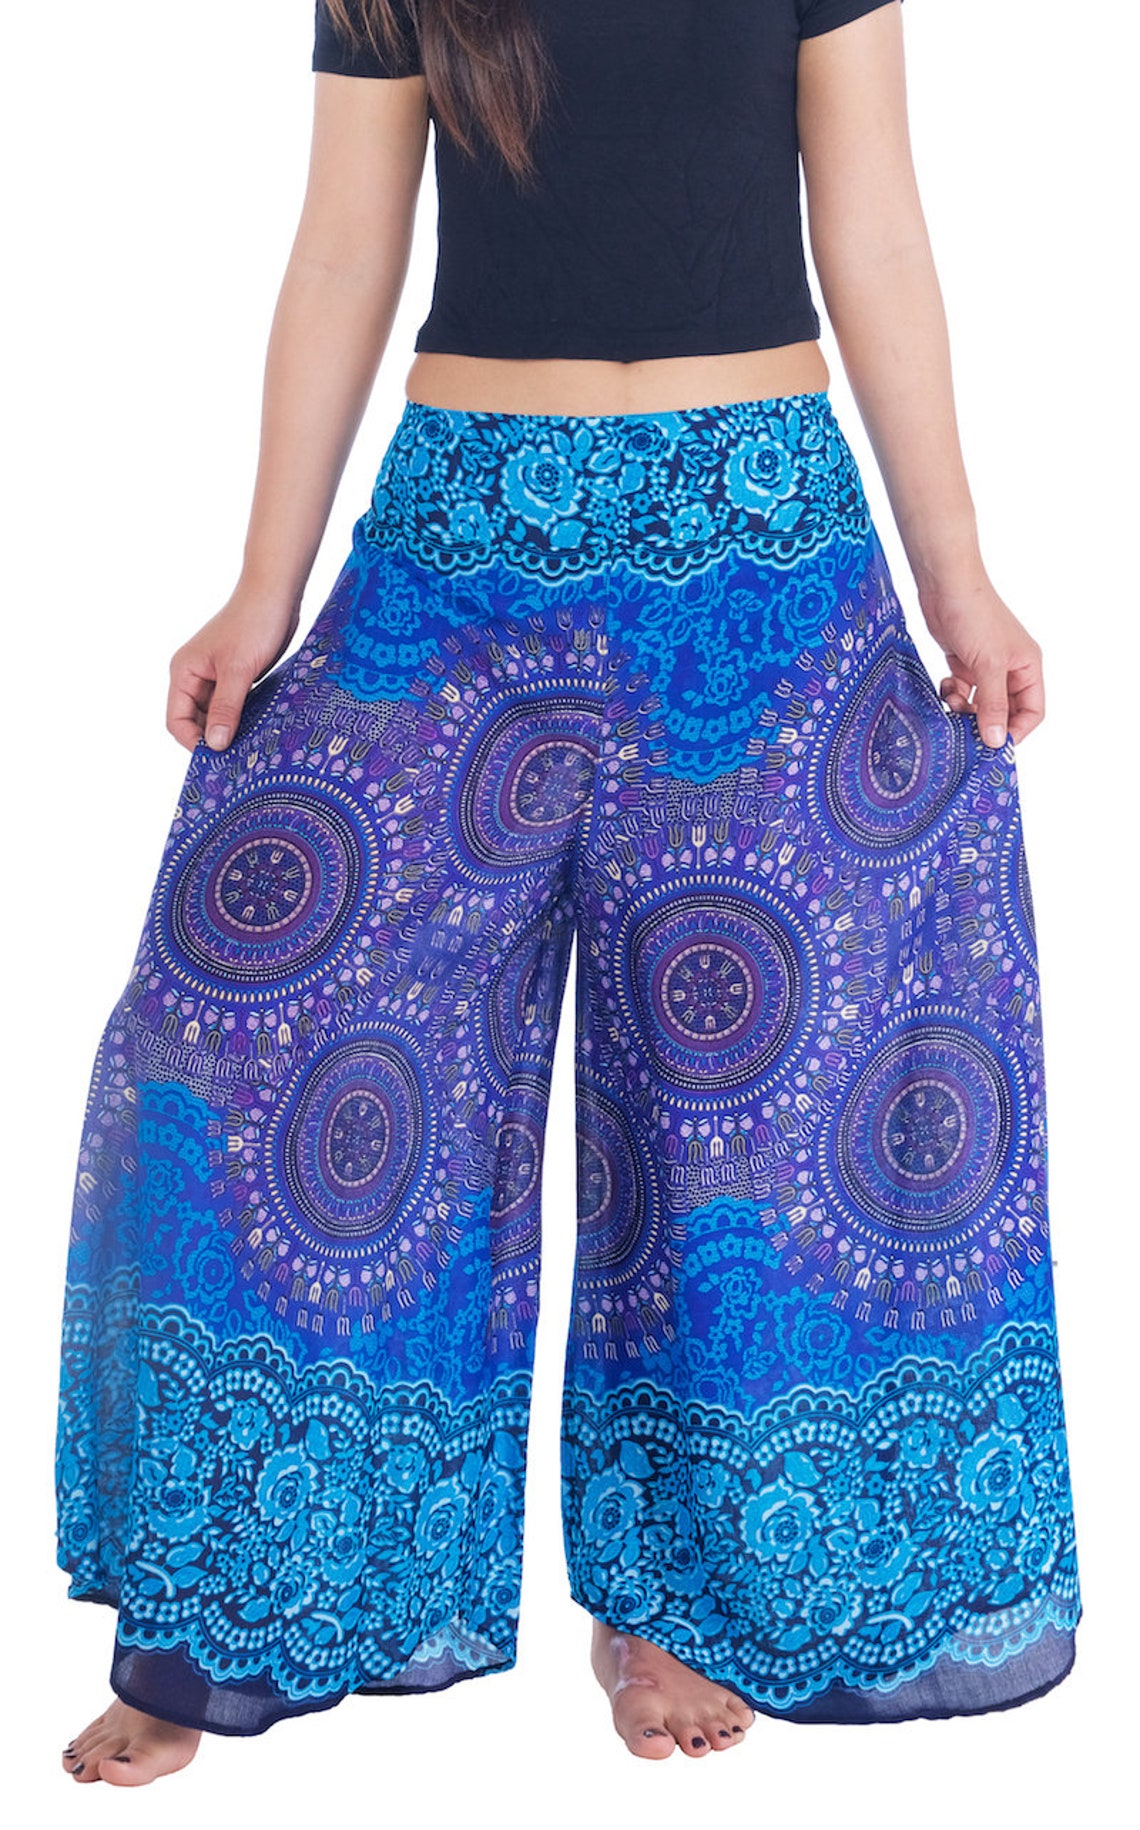 BLUE HIGH WAISTED Palazzo Pants Petite Small to Plus Sizes - Etsy